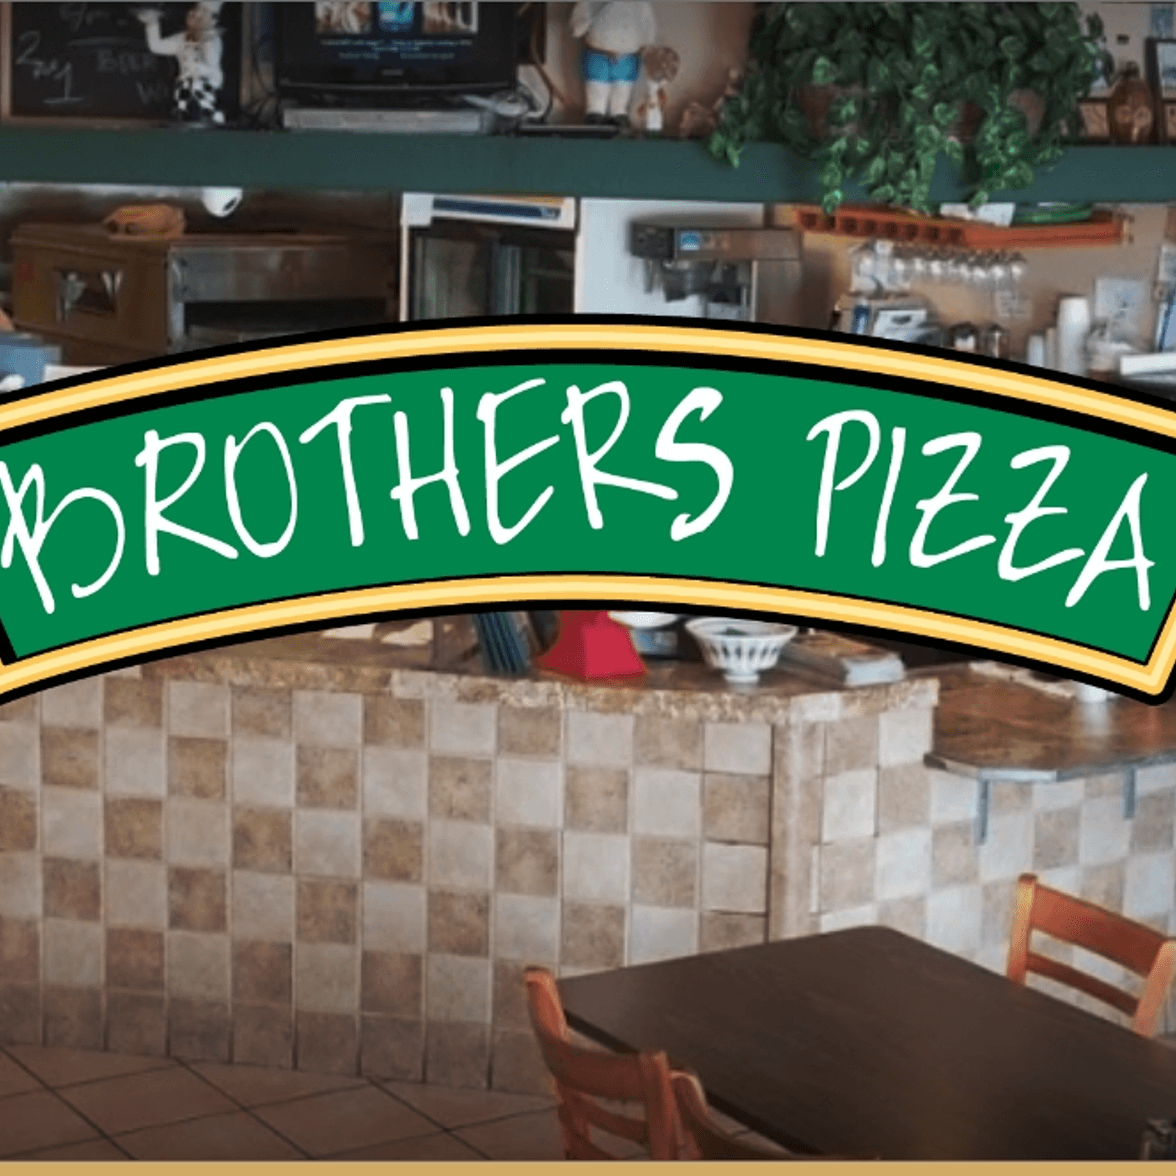 Welcome to Brothers Pizza